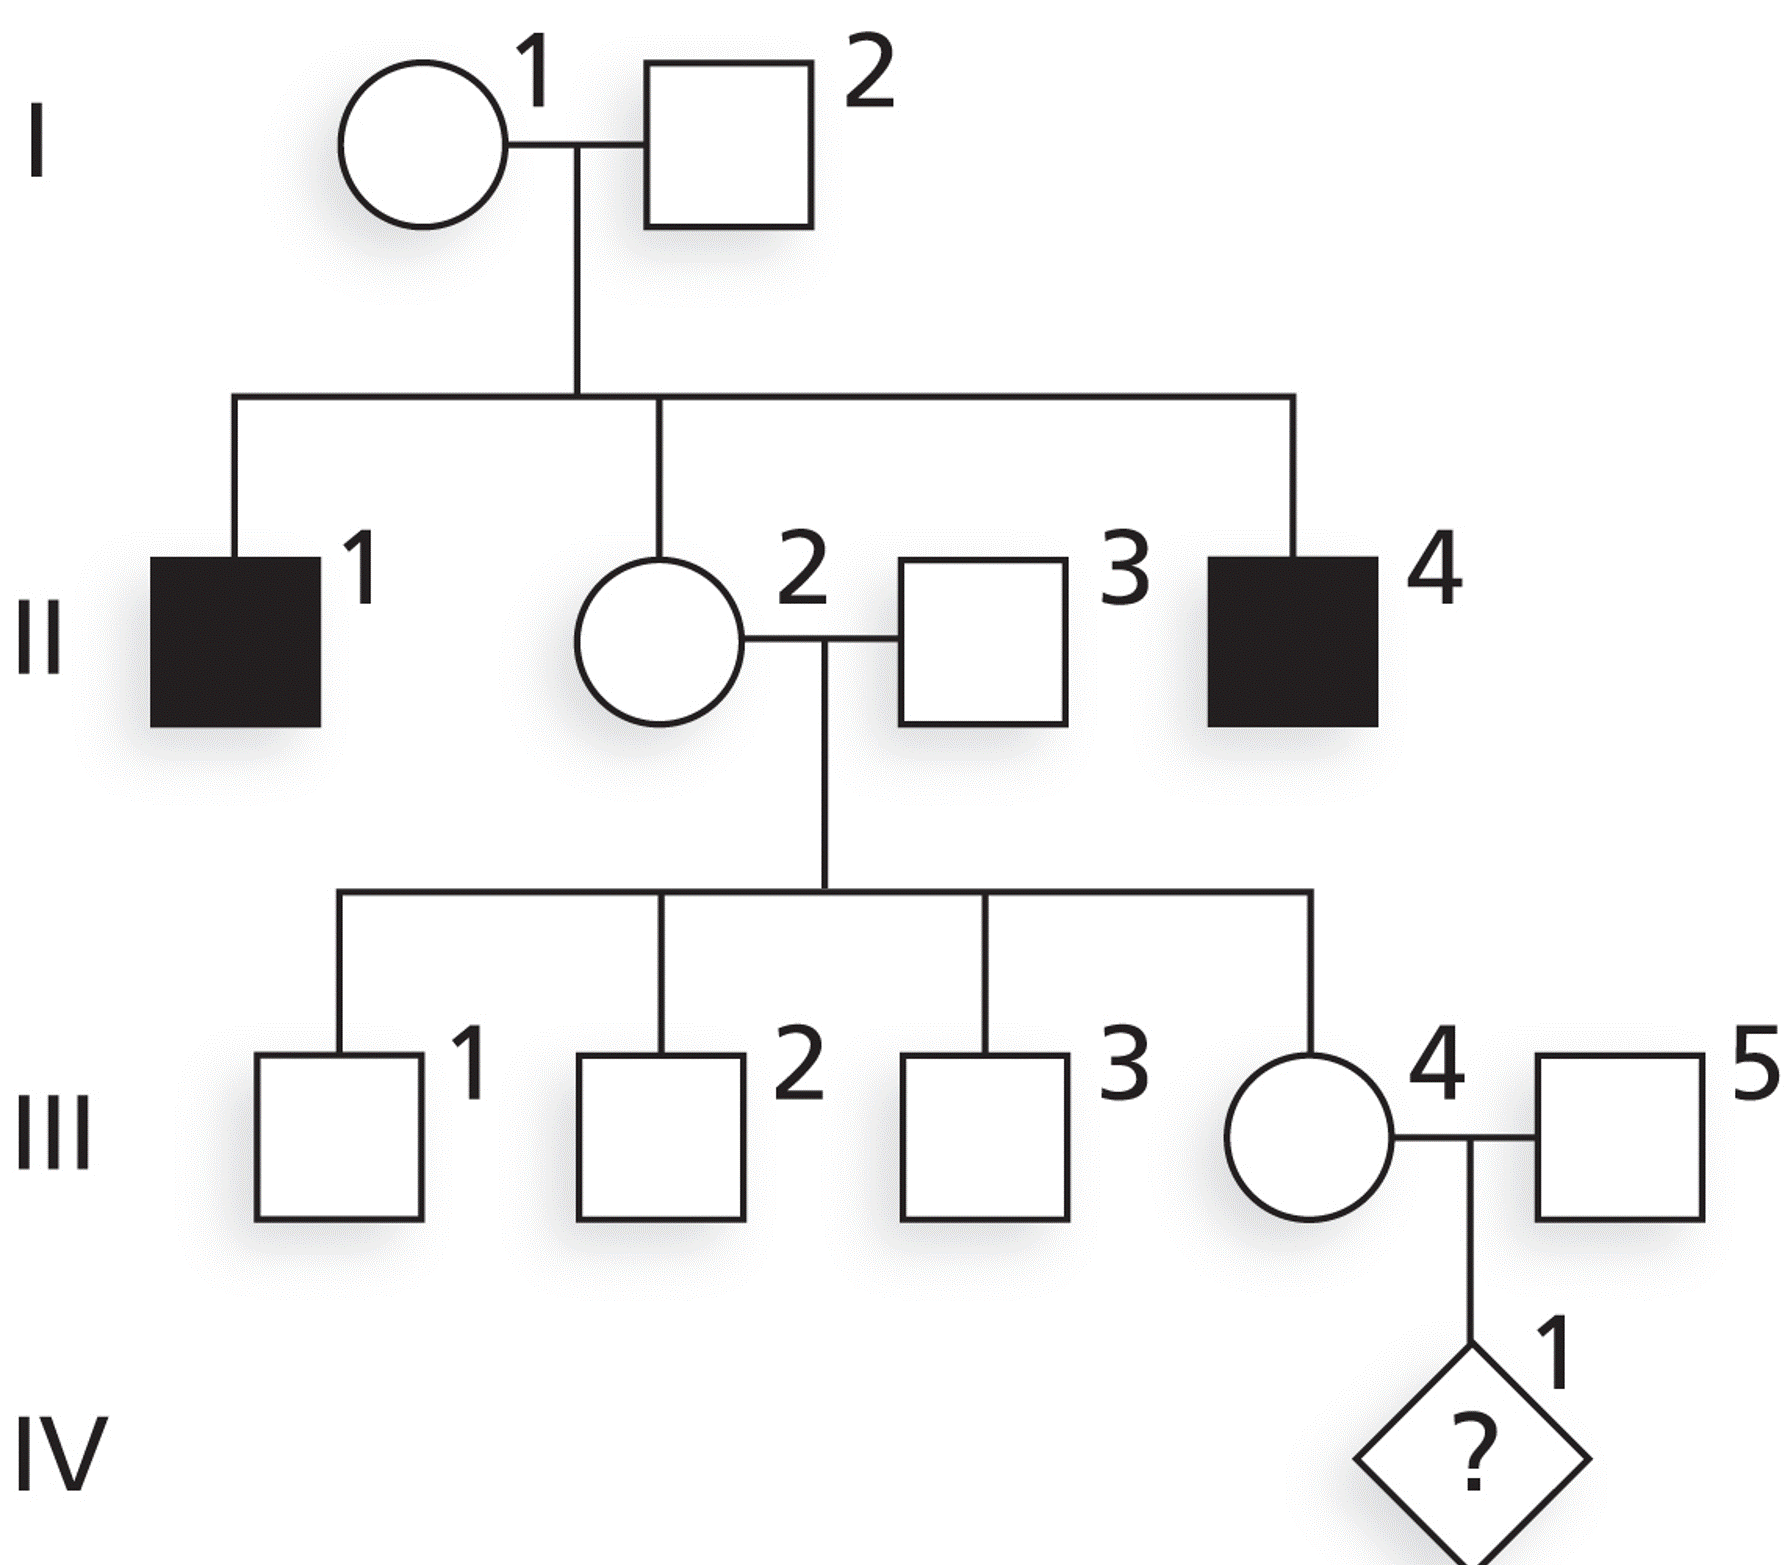 The family described in Example Case 5